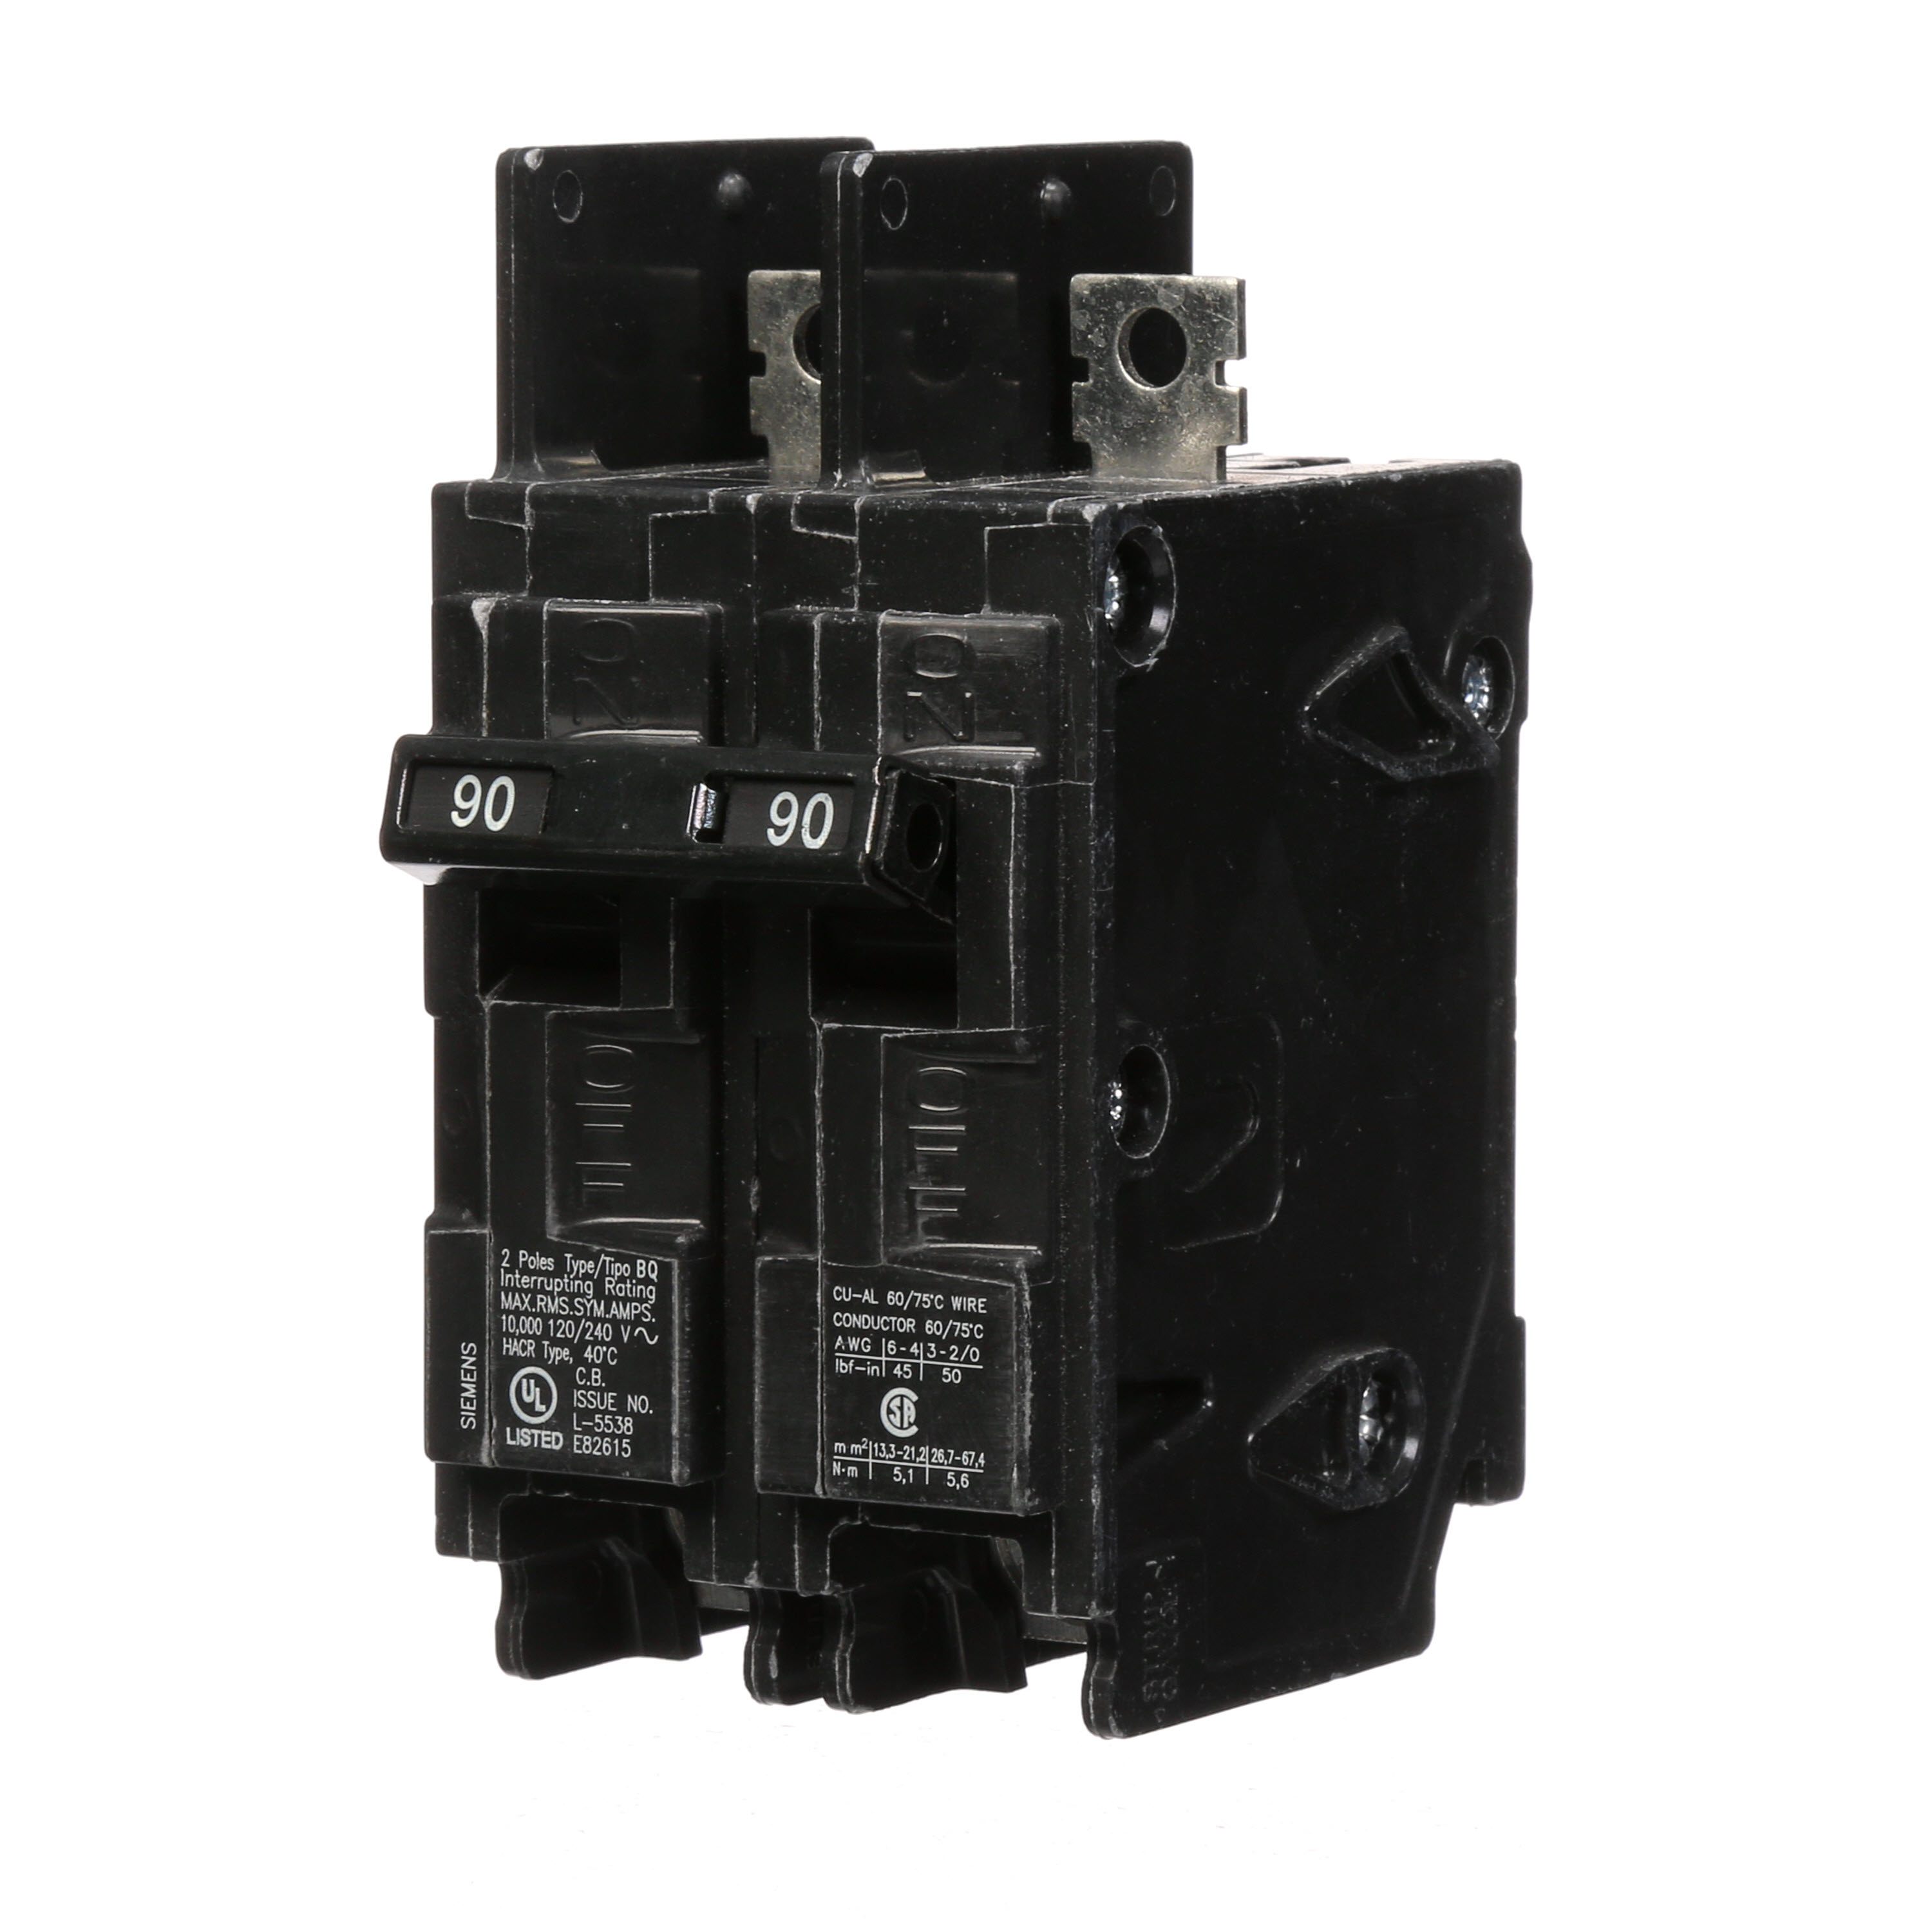 Siemens Low Voltage Molded Case Circuit Breakers General Purpose MCCBs - Type BQ, 2-Pole, 120/240VAC are Circuit Protection Molded Case Circuit Breakers. 2-Pole Common-Trip circuit breaker type BQ. Rated 120/240V (090A) (AIR 10 kA). Special features Load side lugs are included.